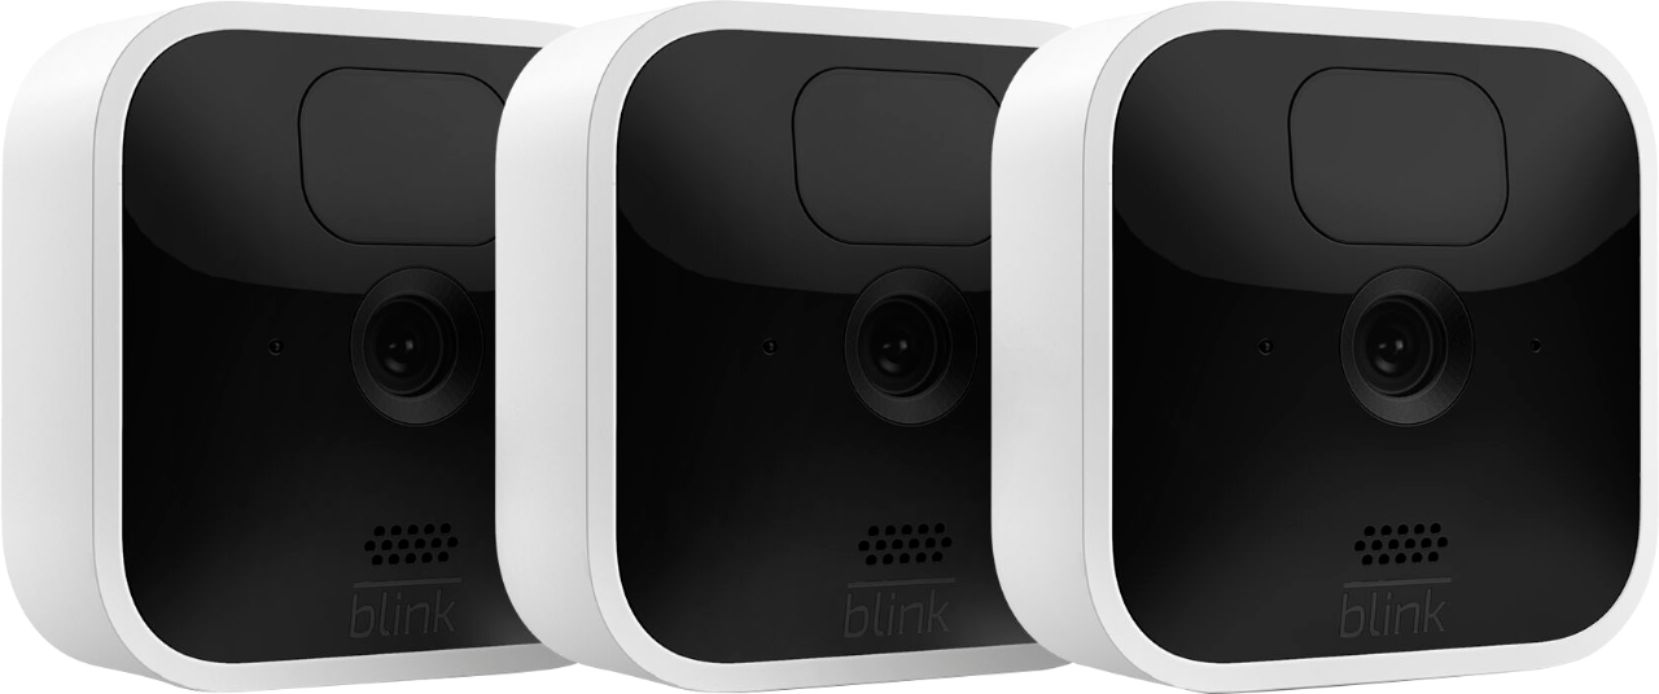 Blink Outdoor 4 Wireless 1080p Security System in Black (Set of 3